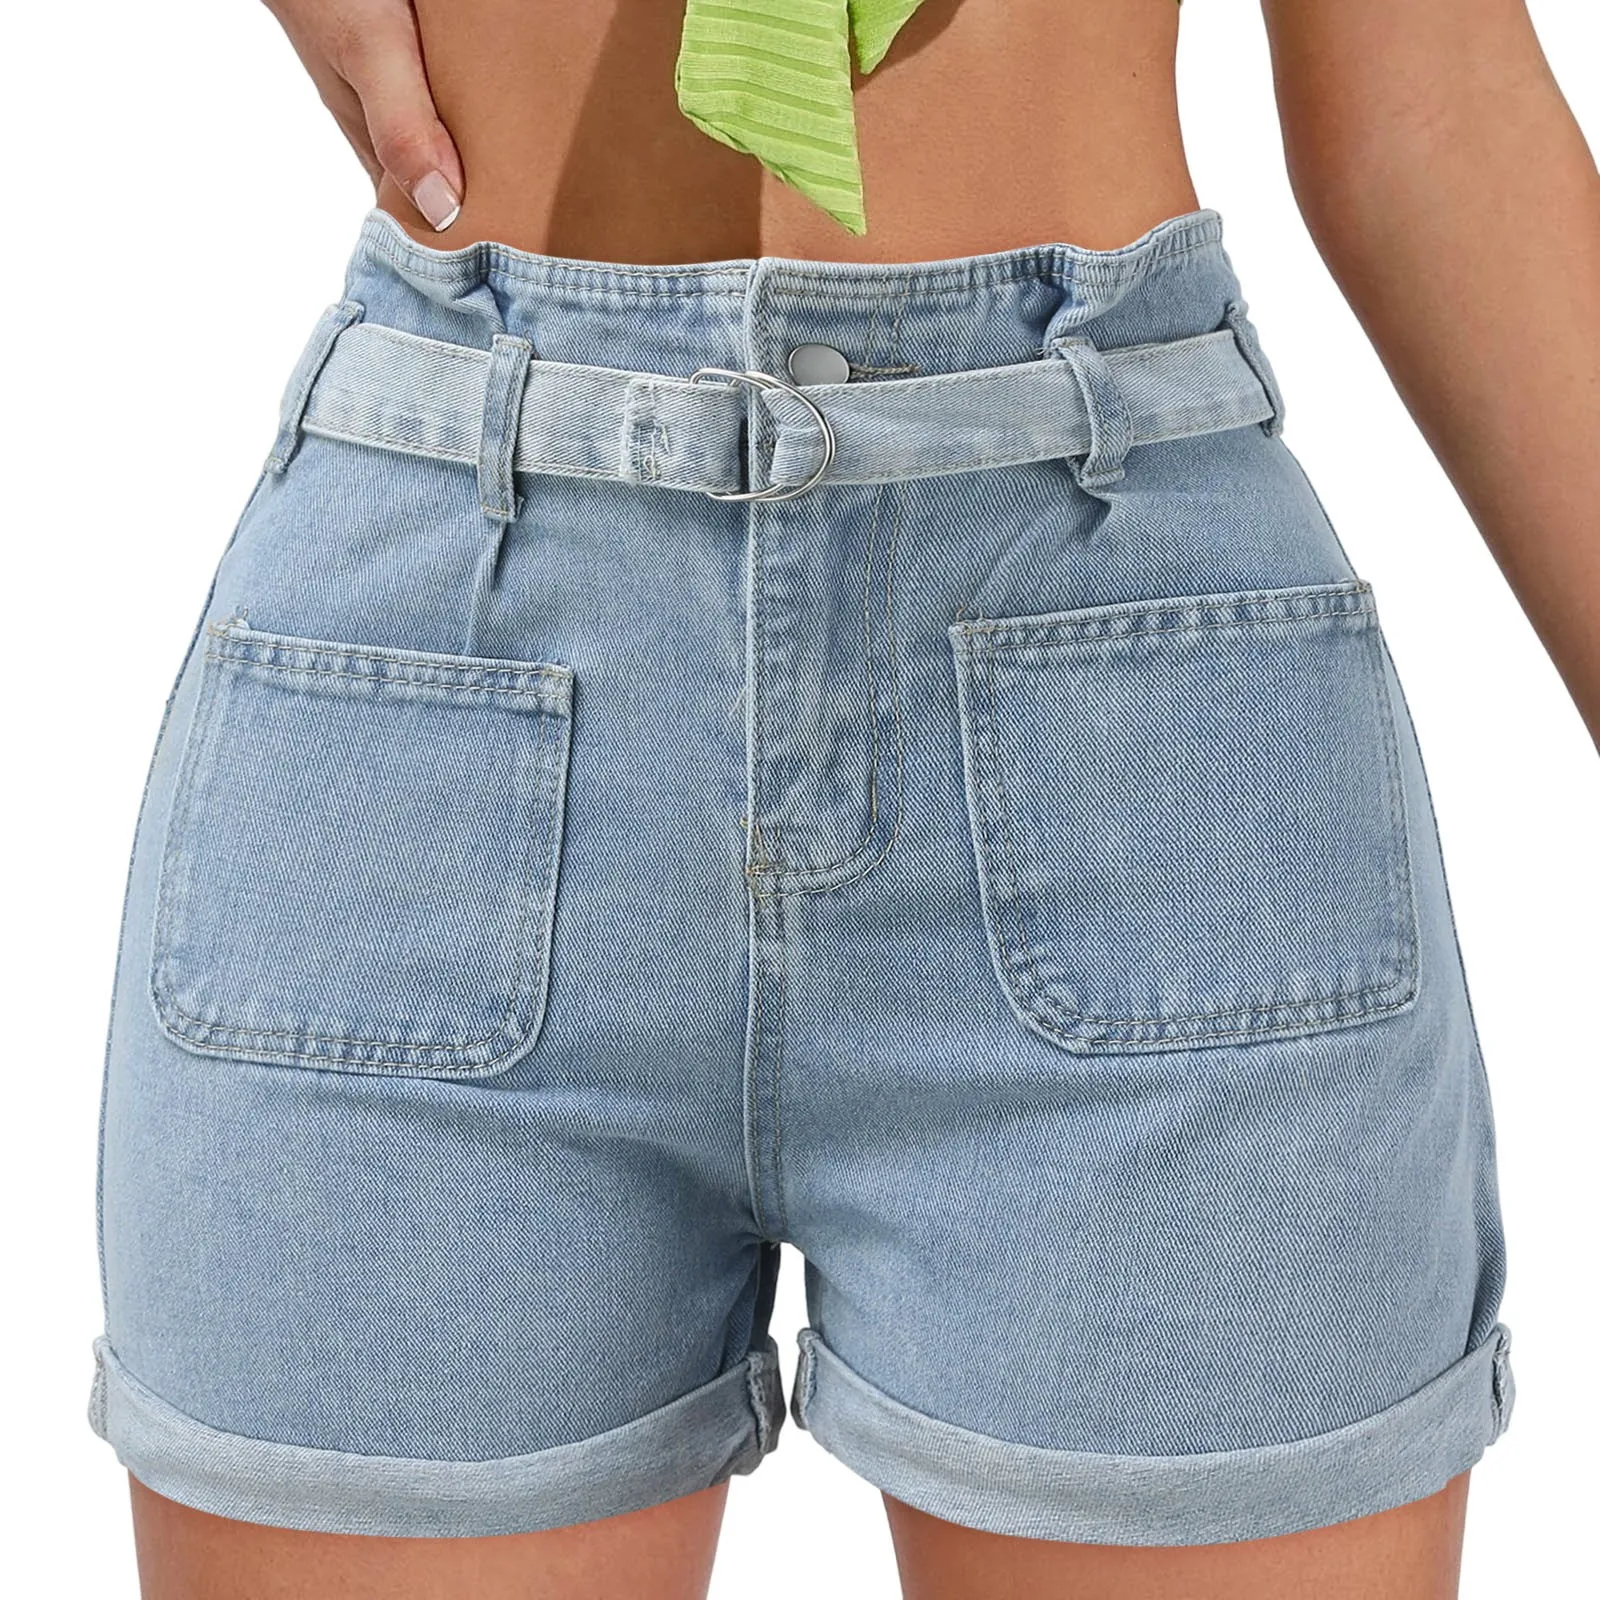 

Women Casual Denim Shorts With Pockets Belt High Waisted Jean Mini Hot Short Pants Mujer Spring Summer Baggy Loose Comfy Cortos